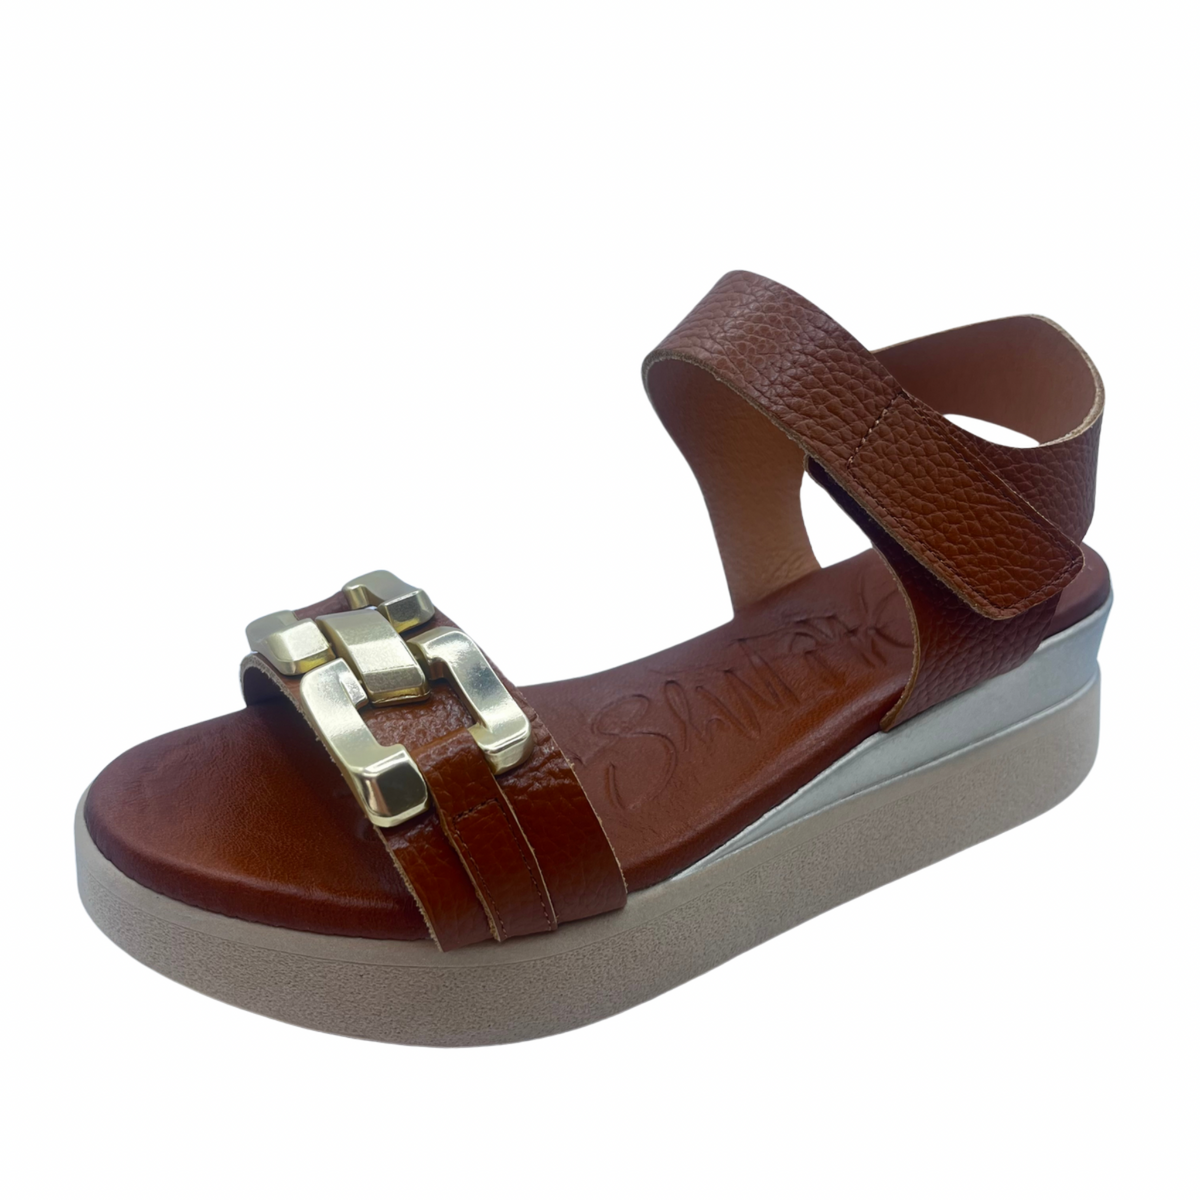 Oh My Sandals Brown Wedge Leather Sandal